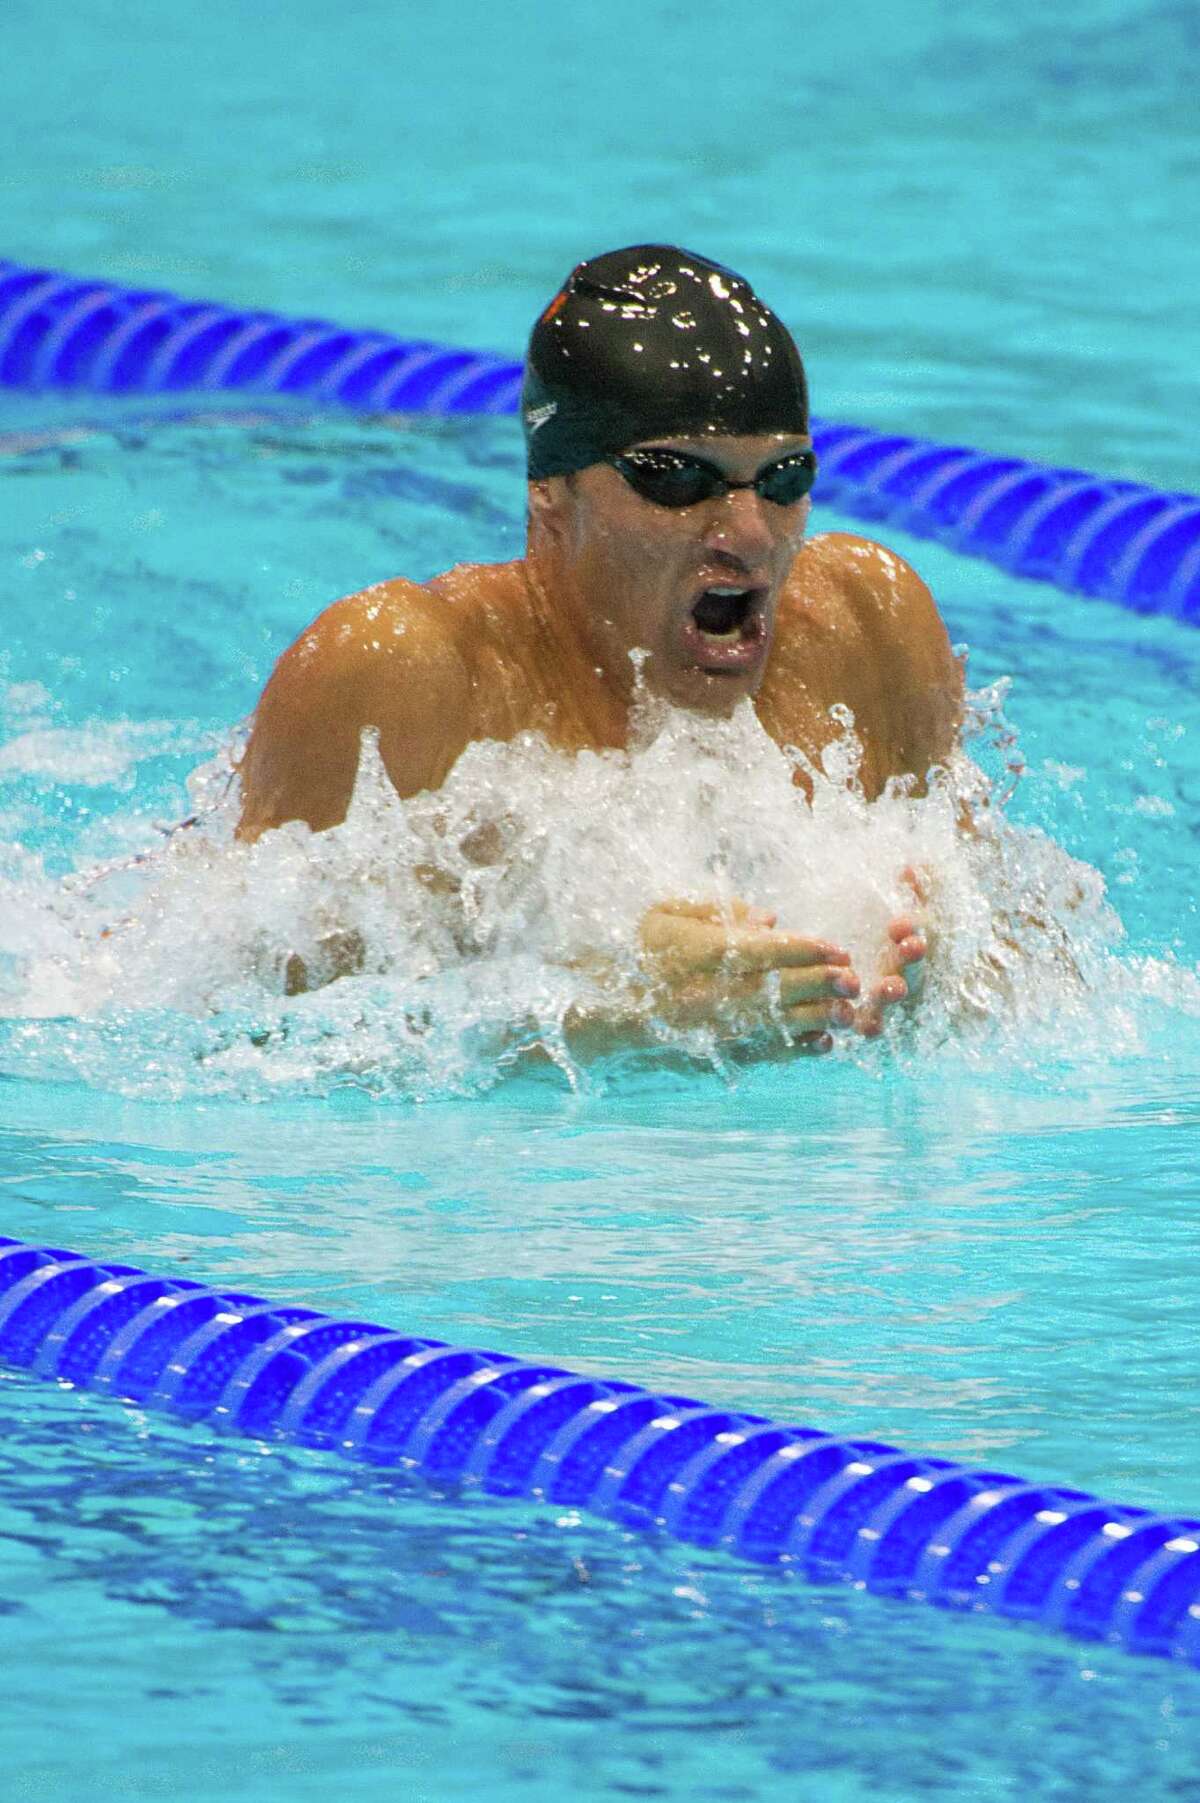 Swimmer Brendan Hansen swims in the semifinals of the 100m breaststroke at the 2012 London Olympics on Saturday, July 28, 2012.